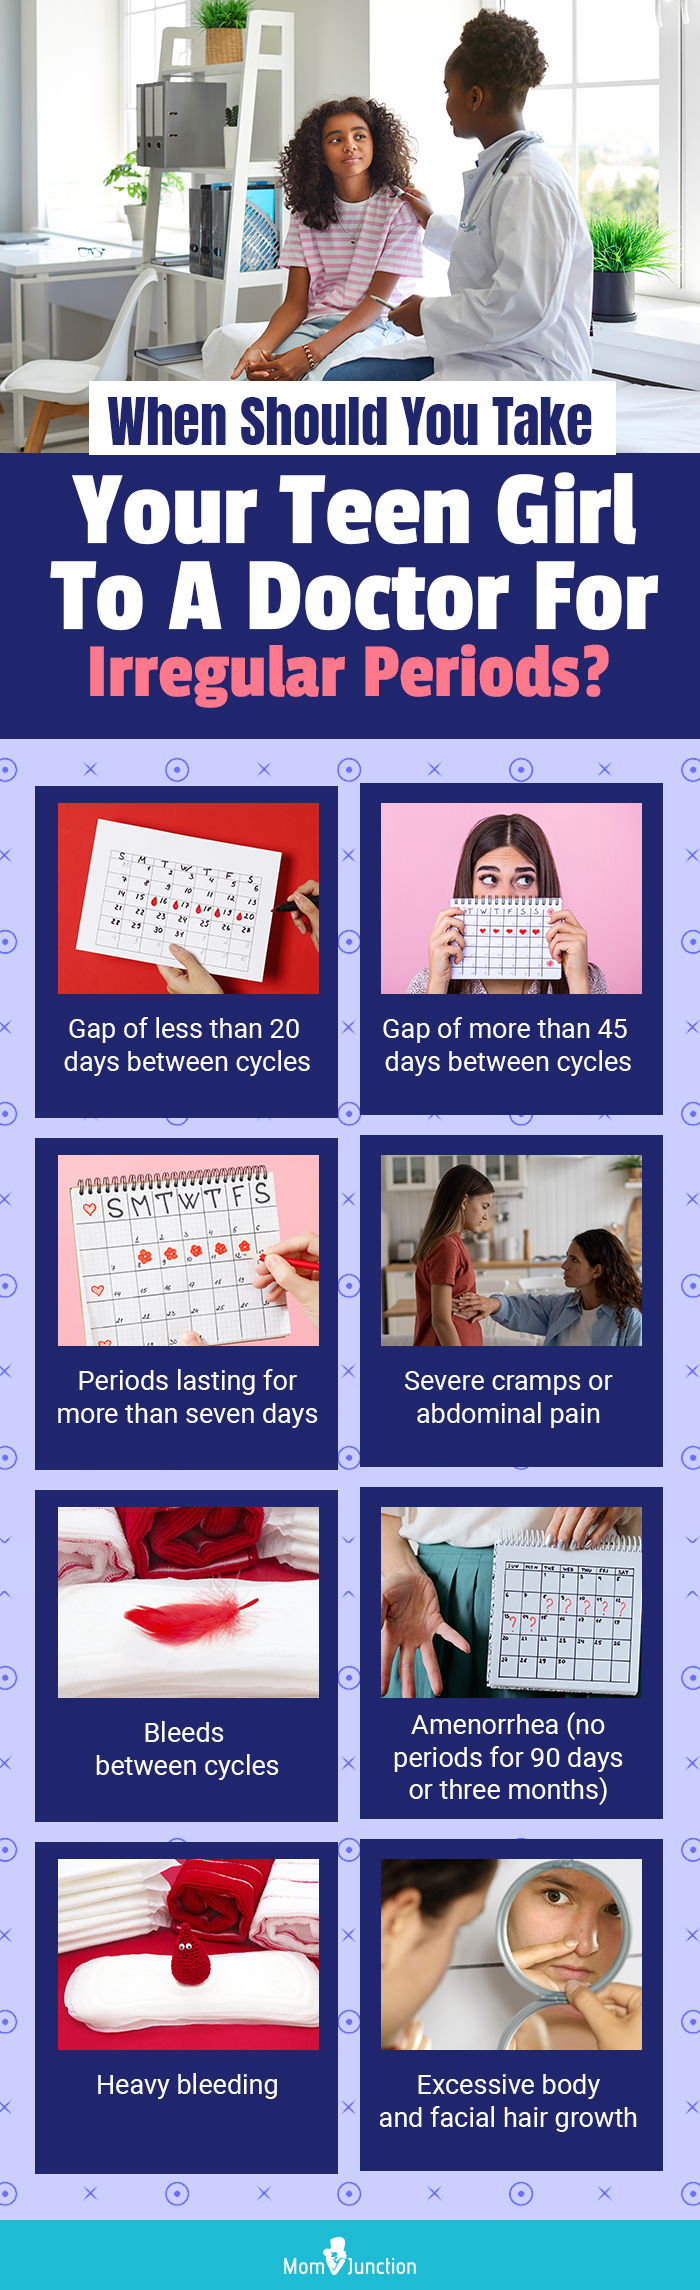 when should you take your teen girl to a doctor for irregular periods (infographic)